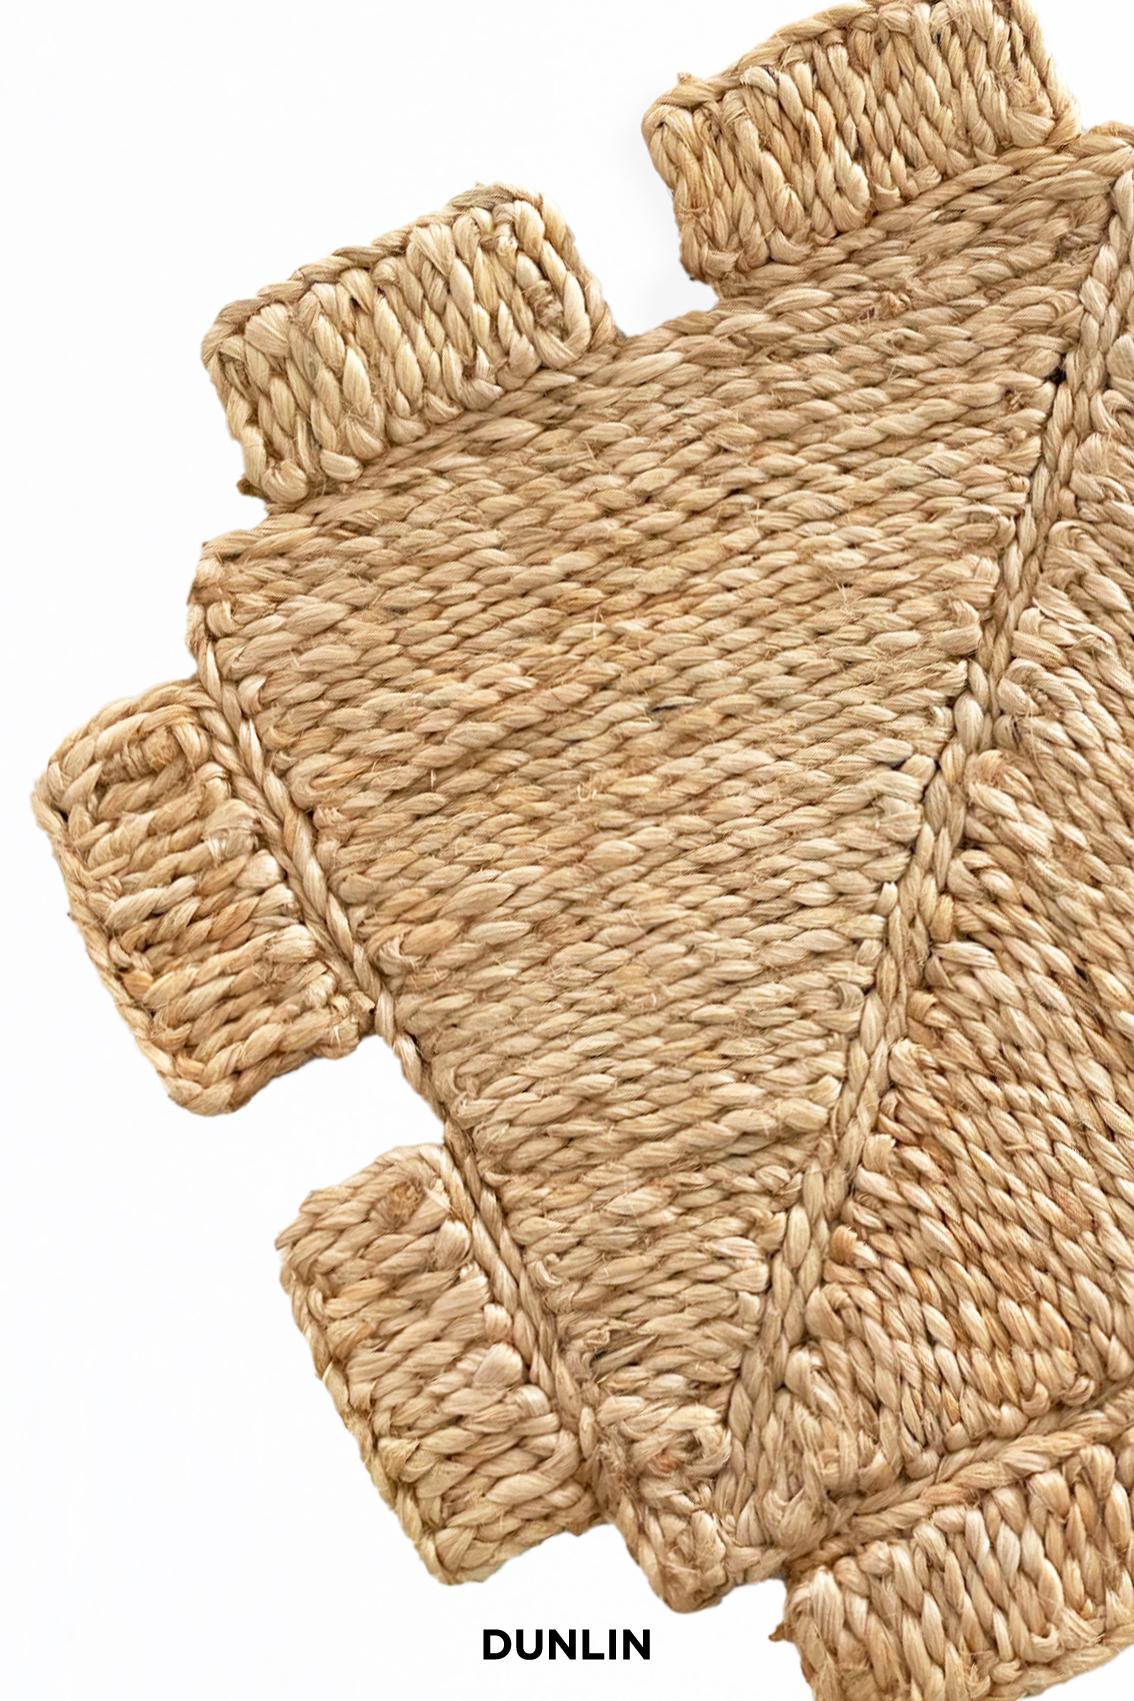 Woven Jute Block Placemats and Trivets by, J'Jute